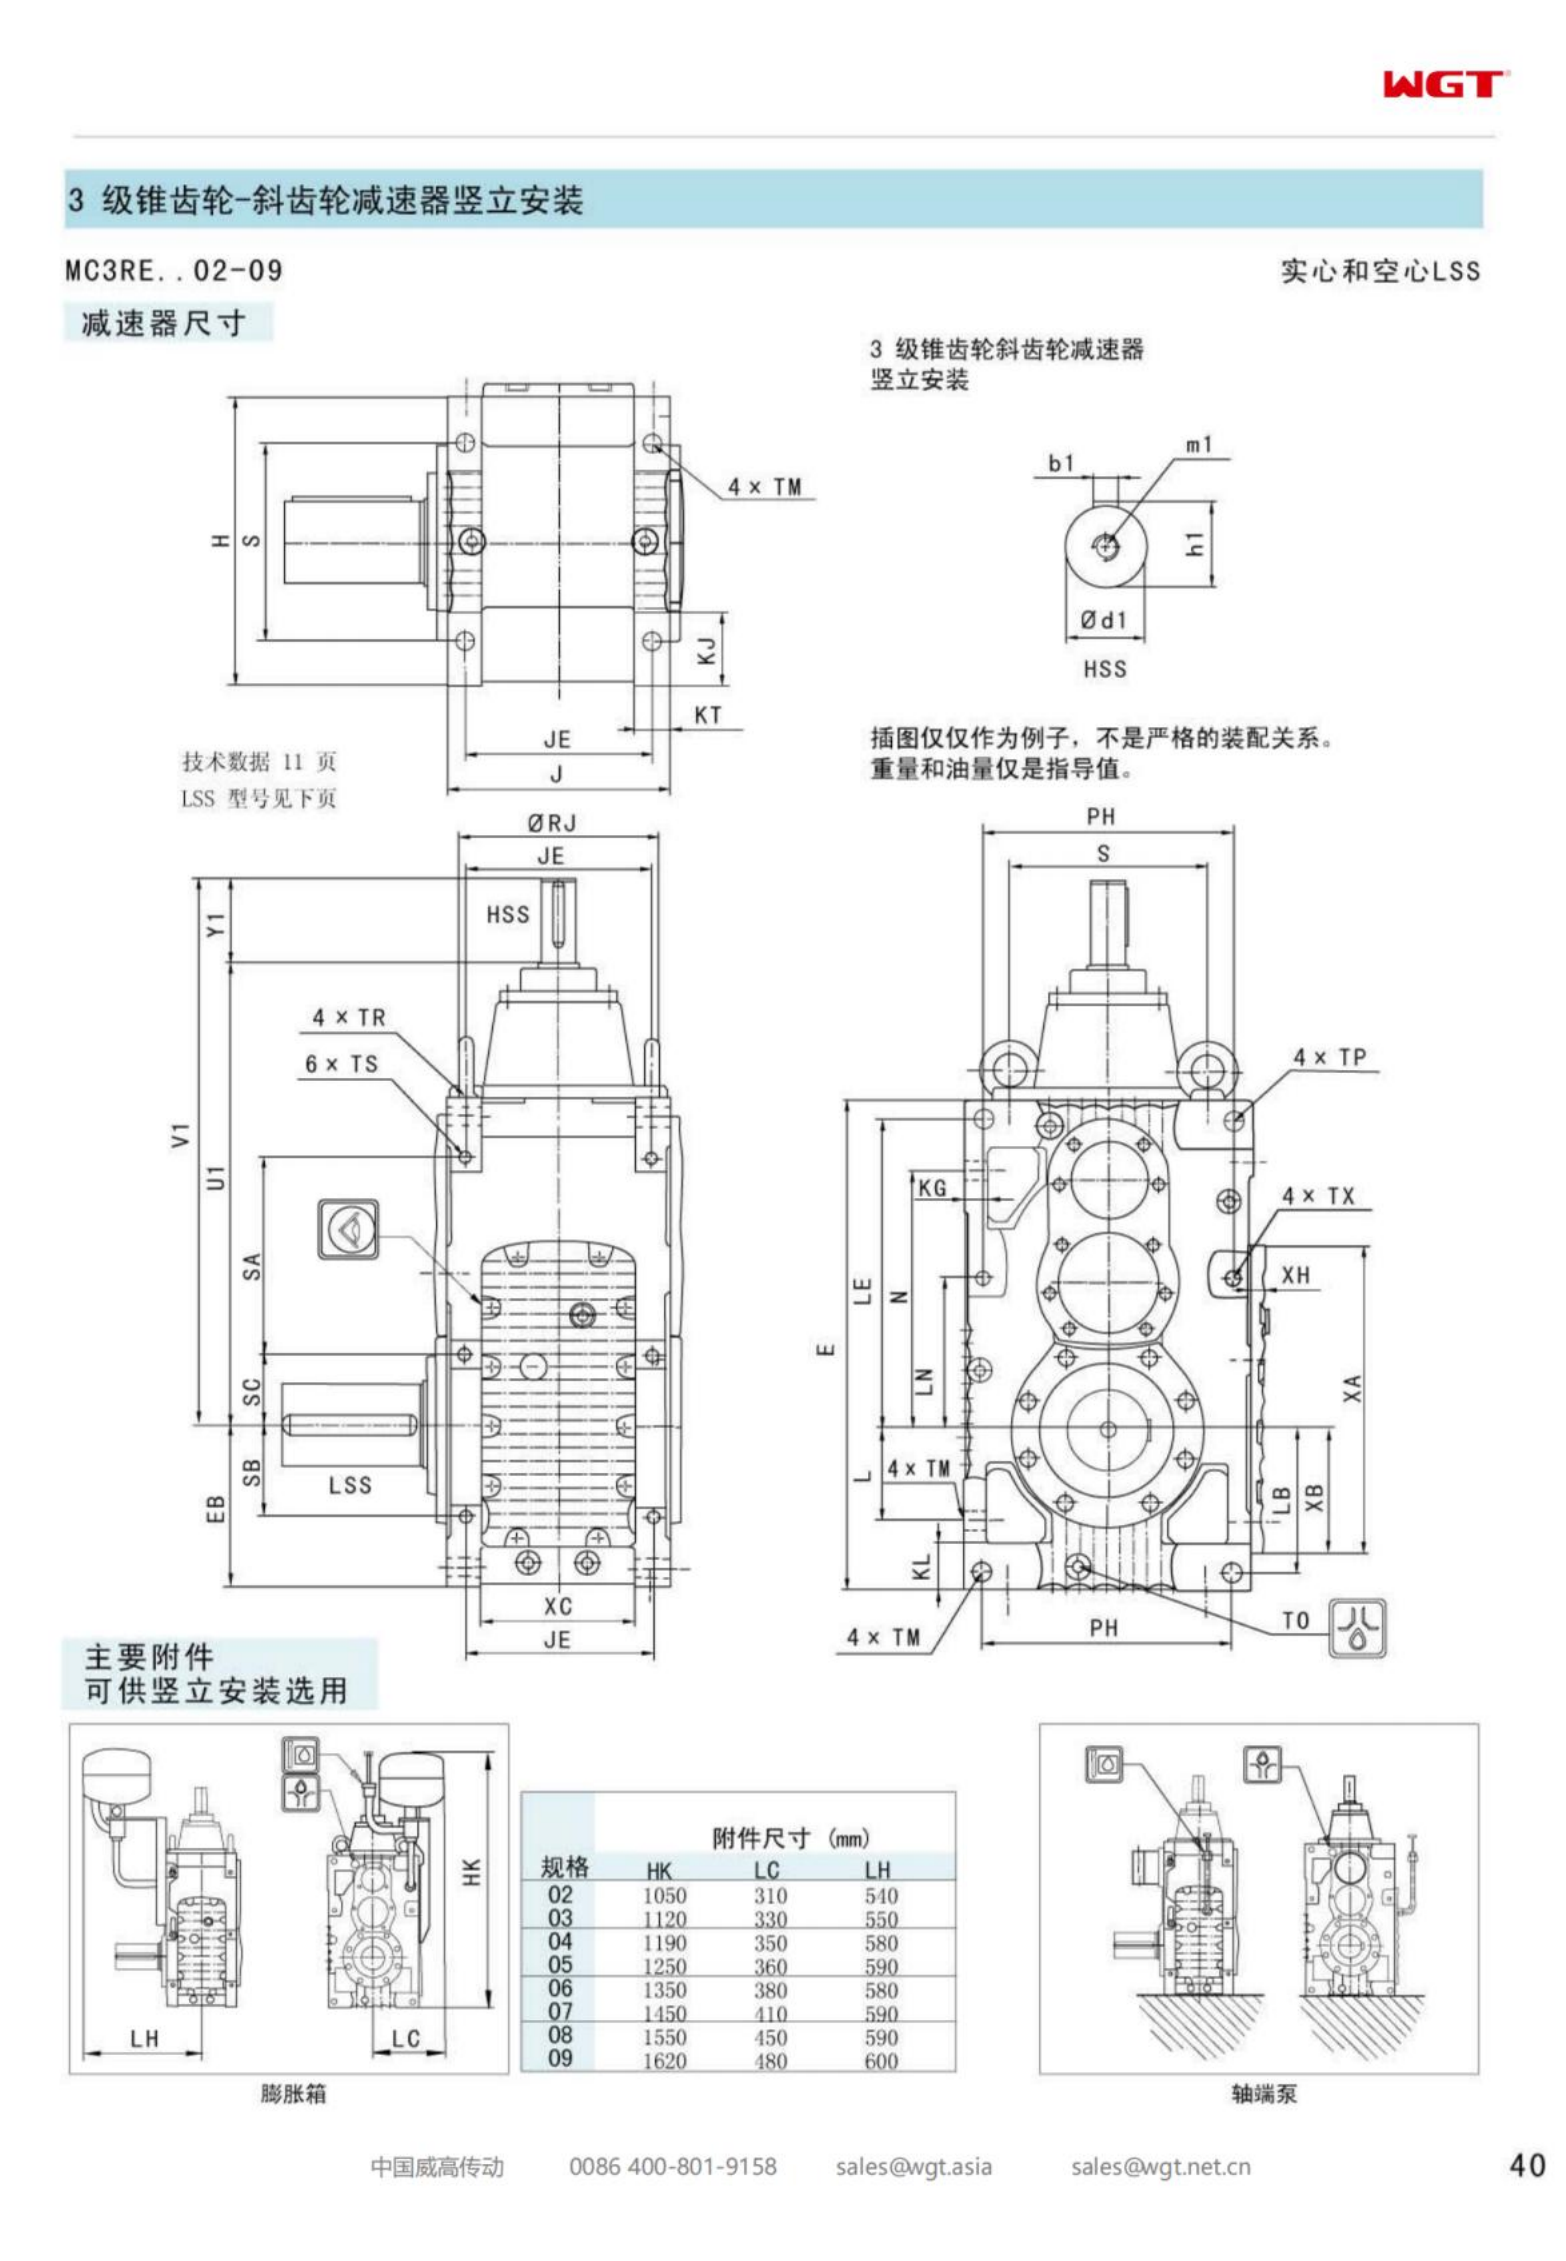 MC3RESF04 Replace_SEW_MC_Series Gearbox